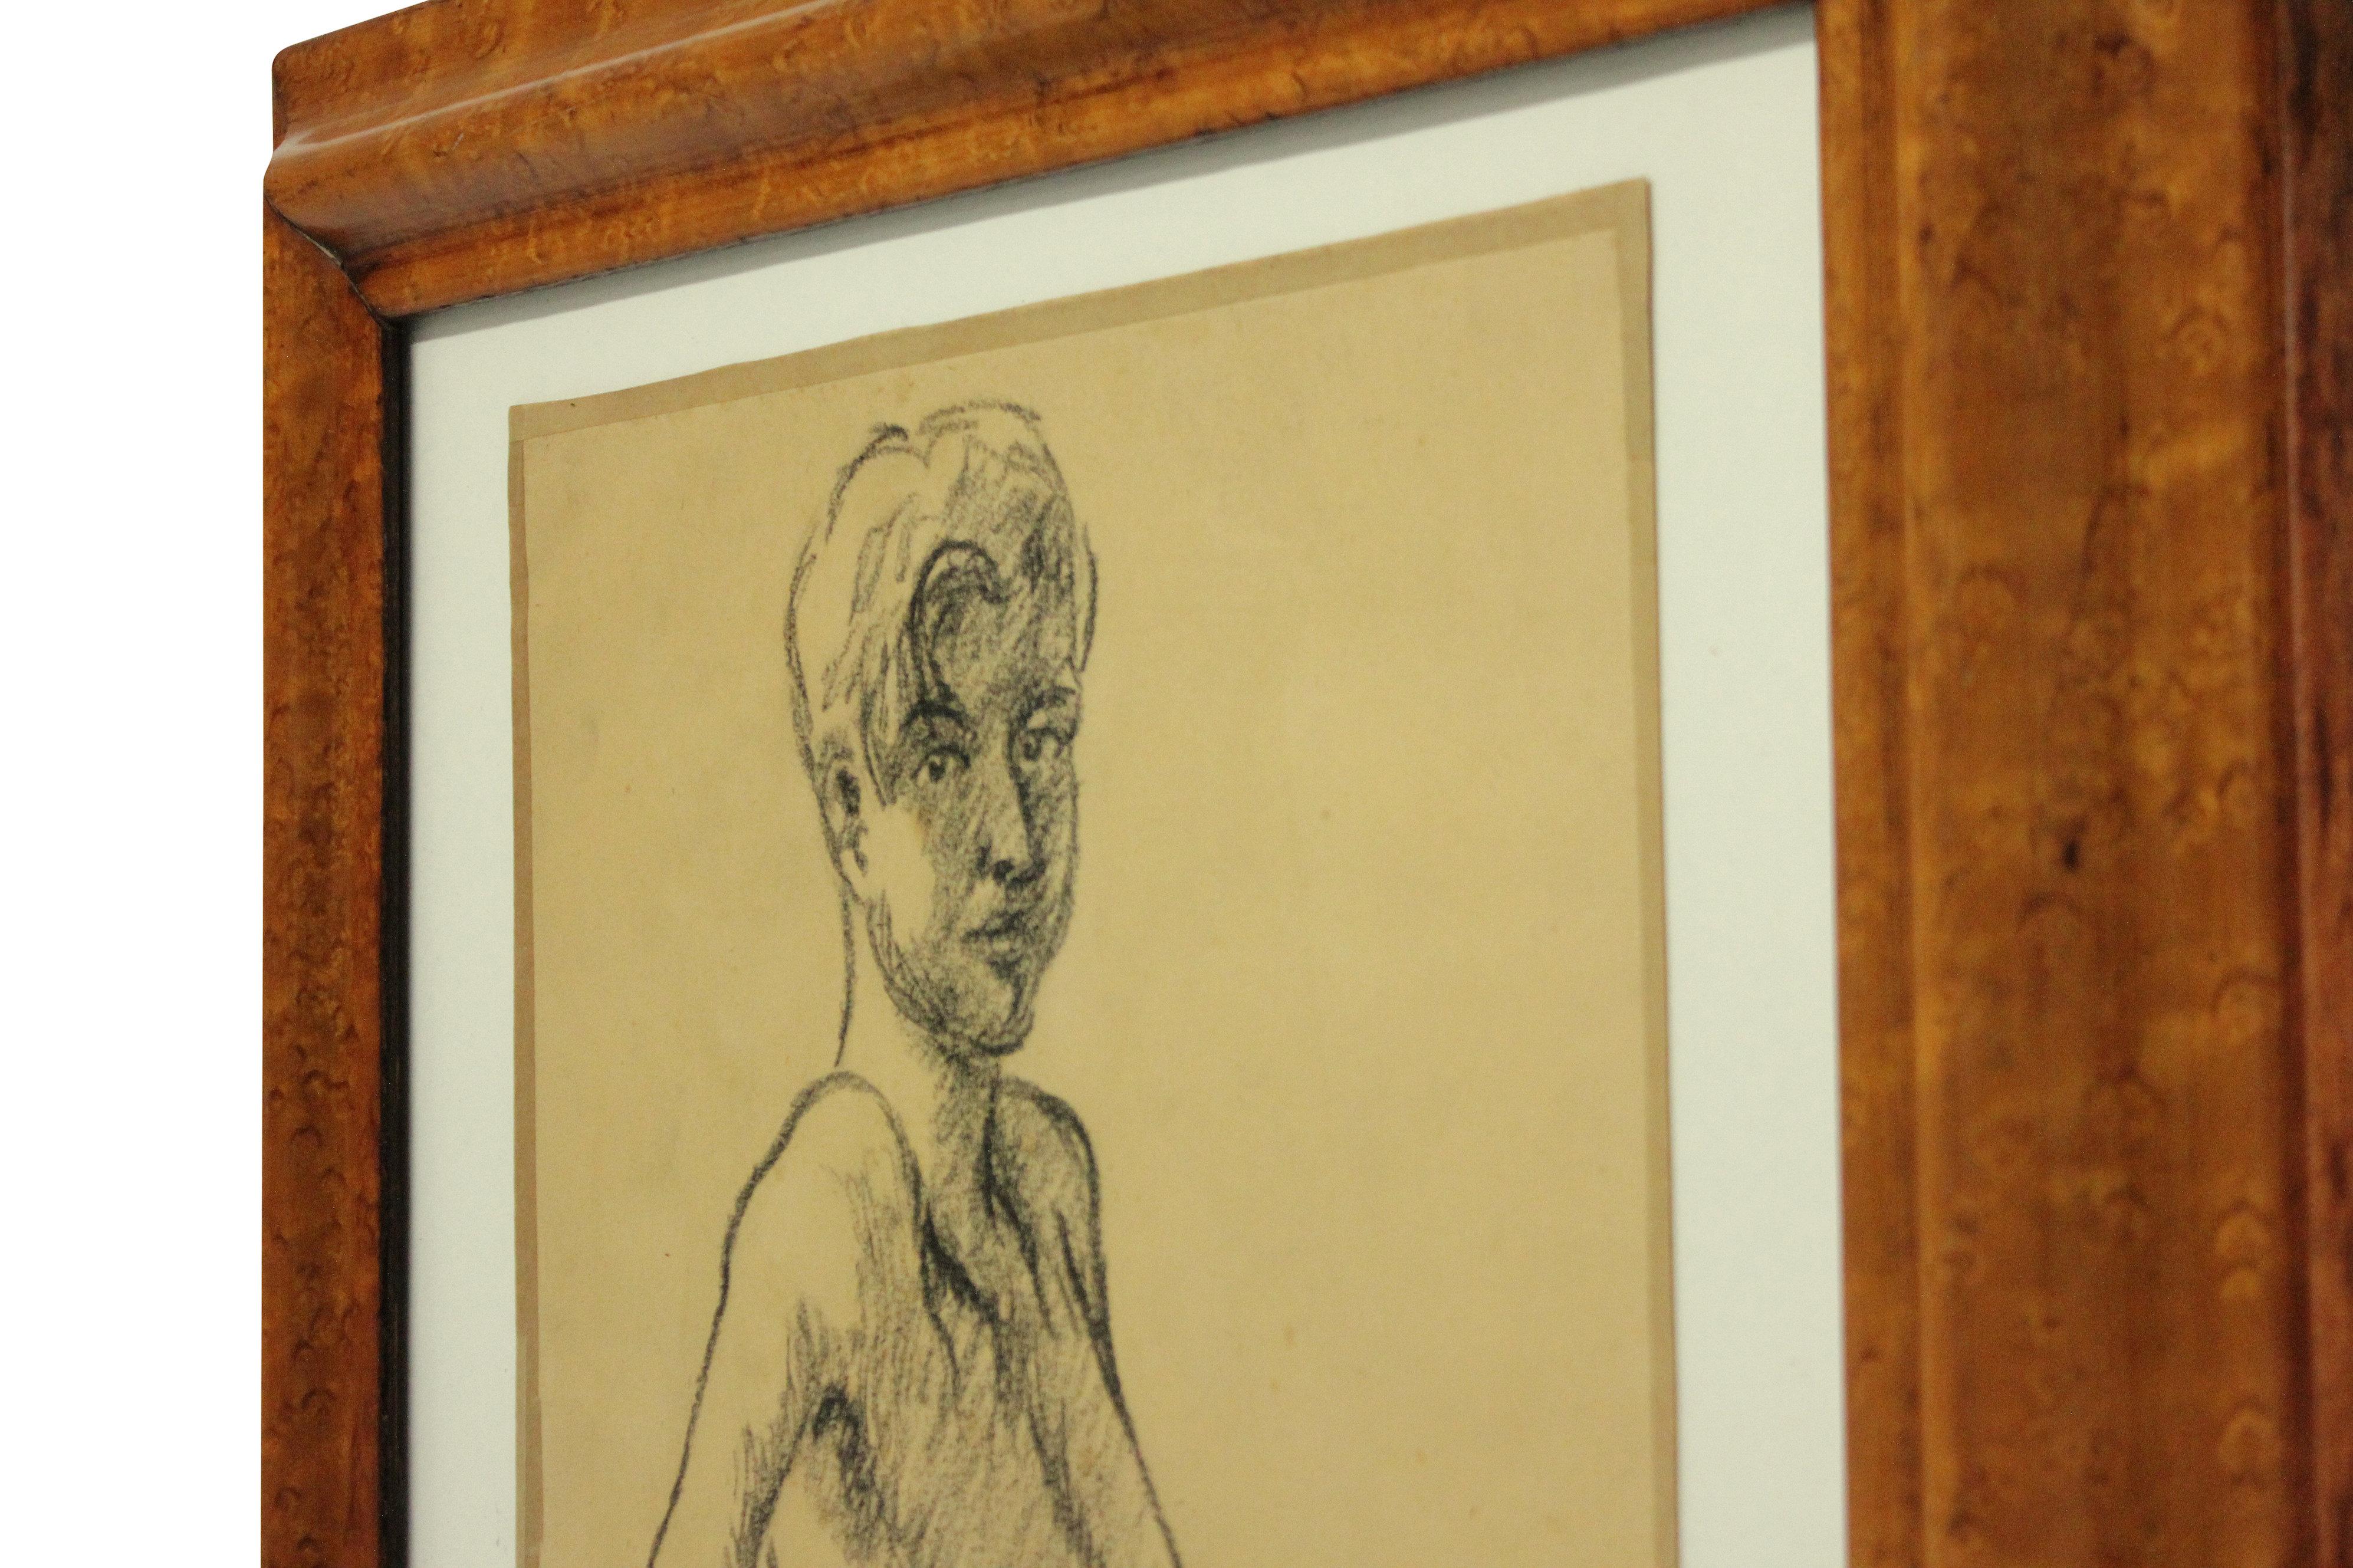 An English portrait of a young man in charcoal on parchment, framed in walnut. Dated and signed 1969.